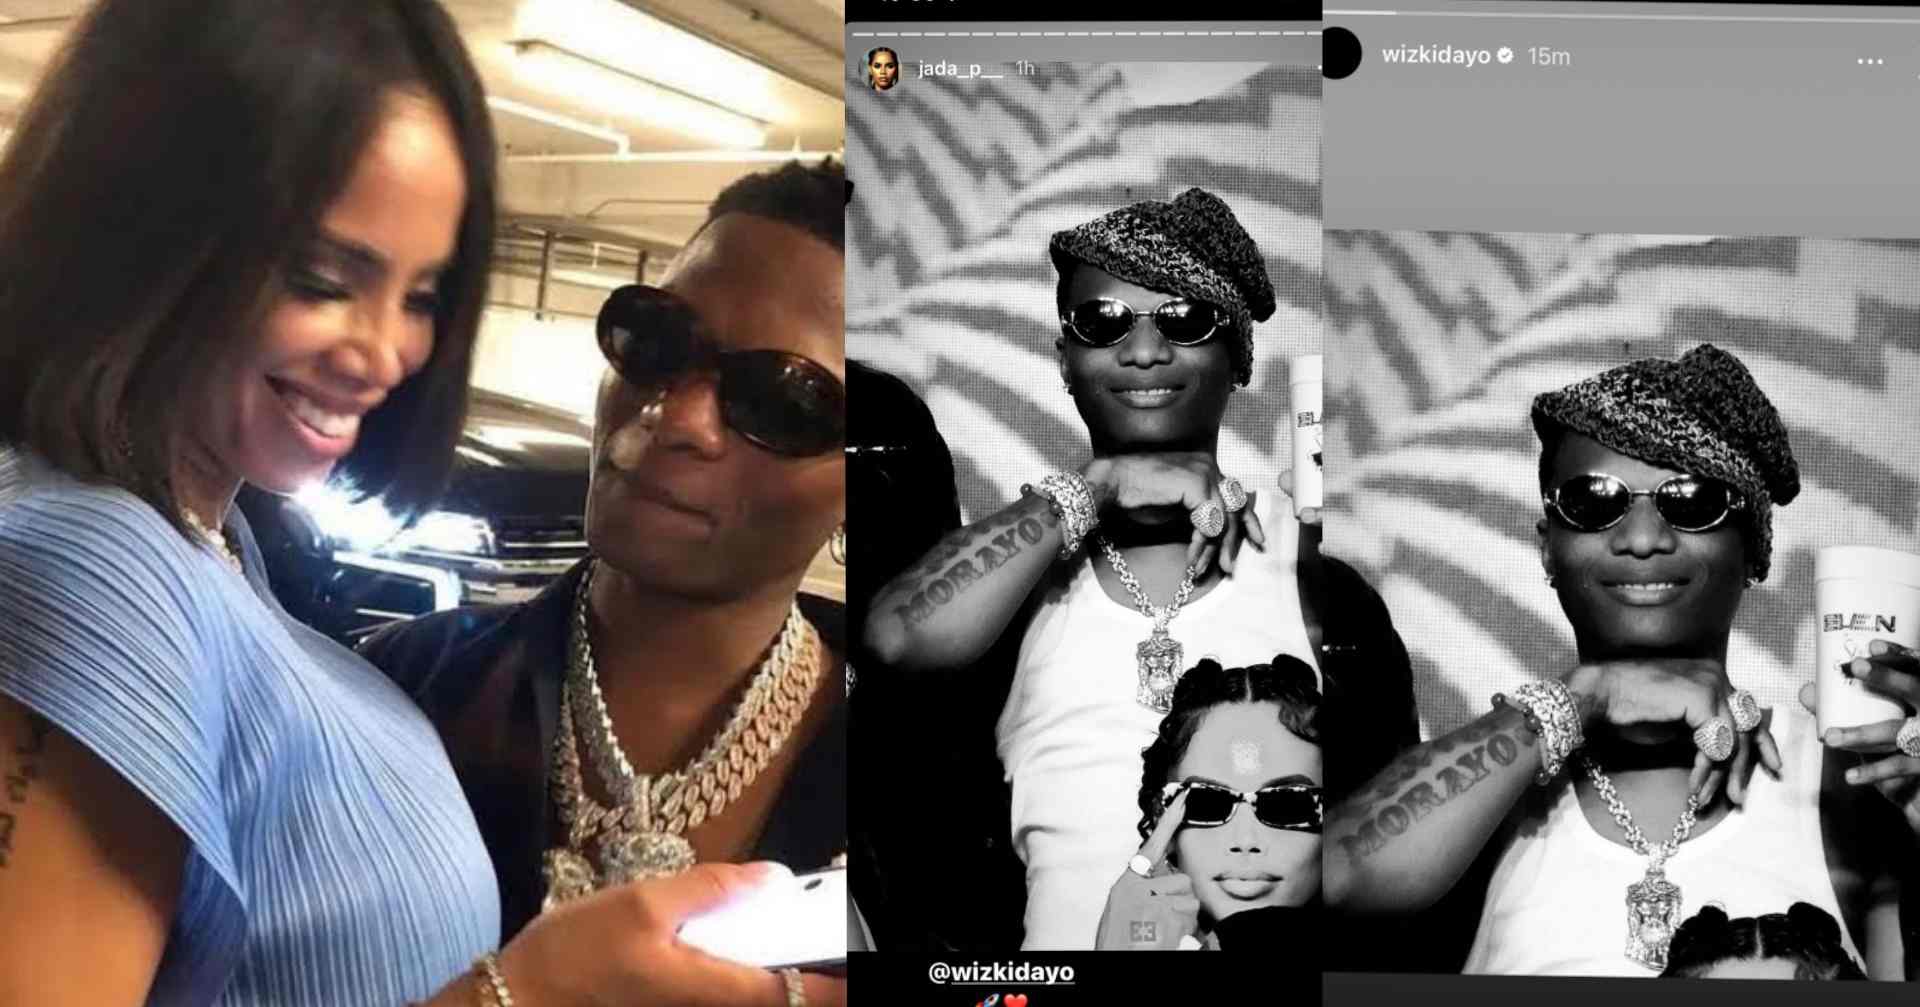 Buzz as Wizkid crops out Jada P from photo they took together